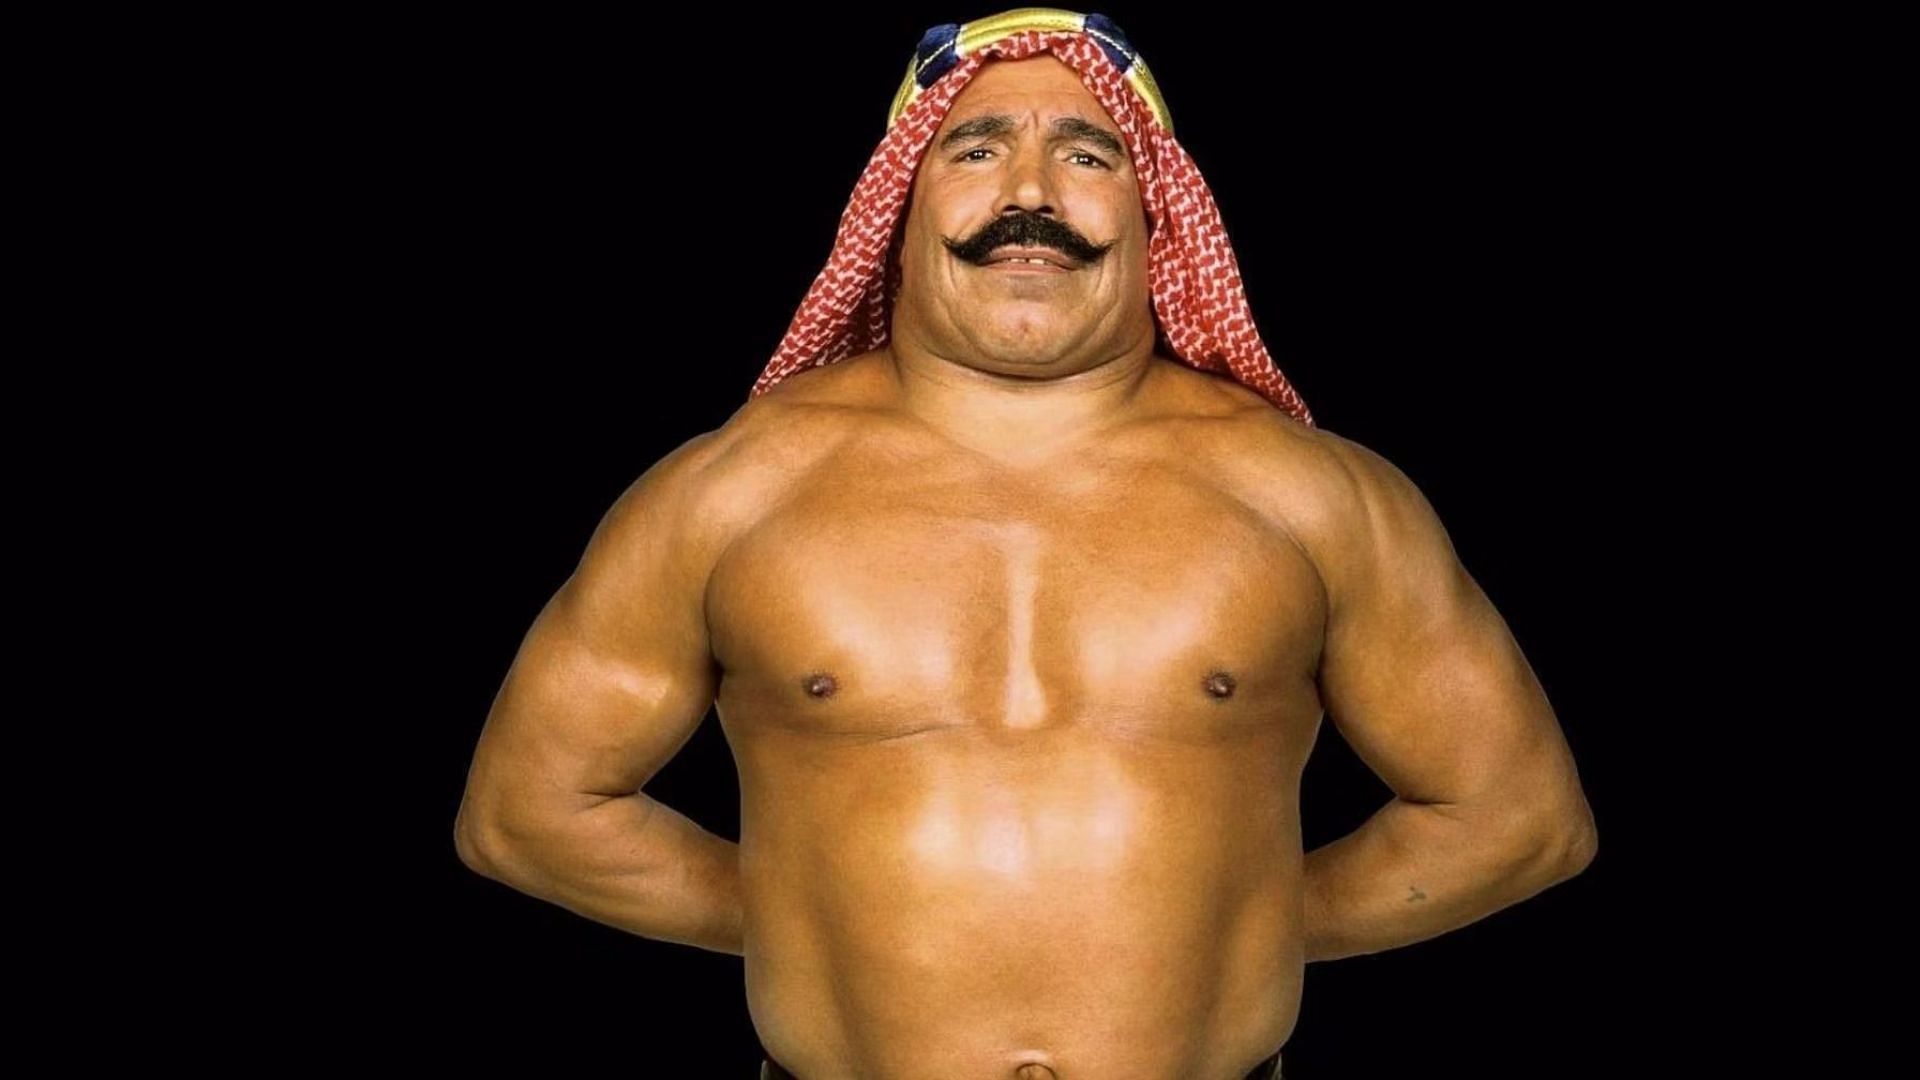 The Iron Sheik is a WWE Hall of Famer